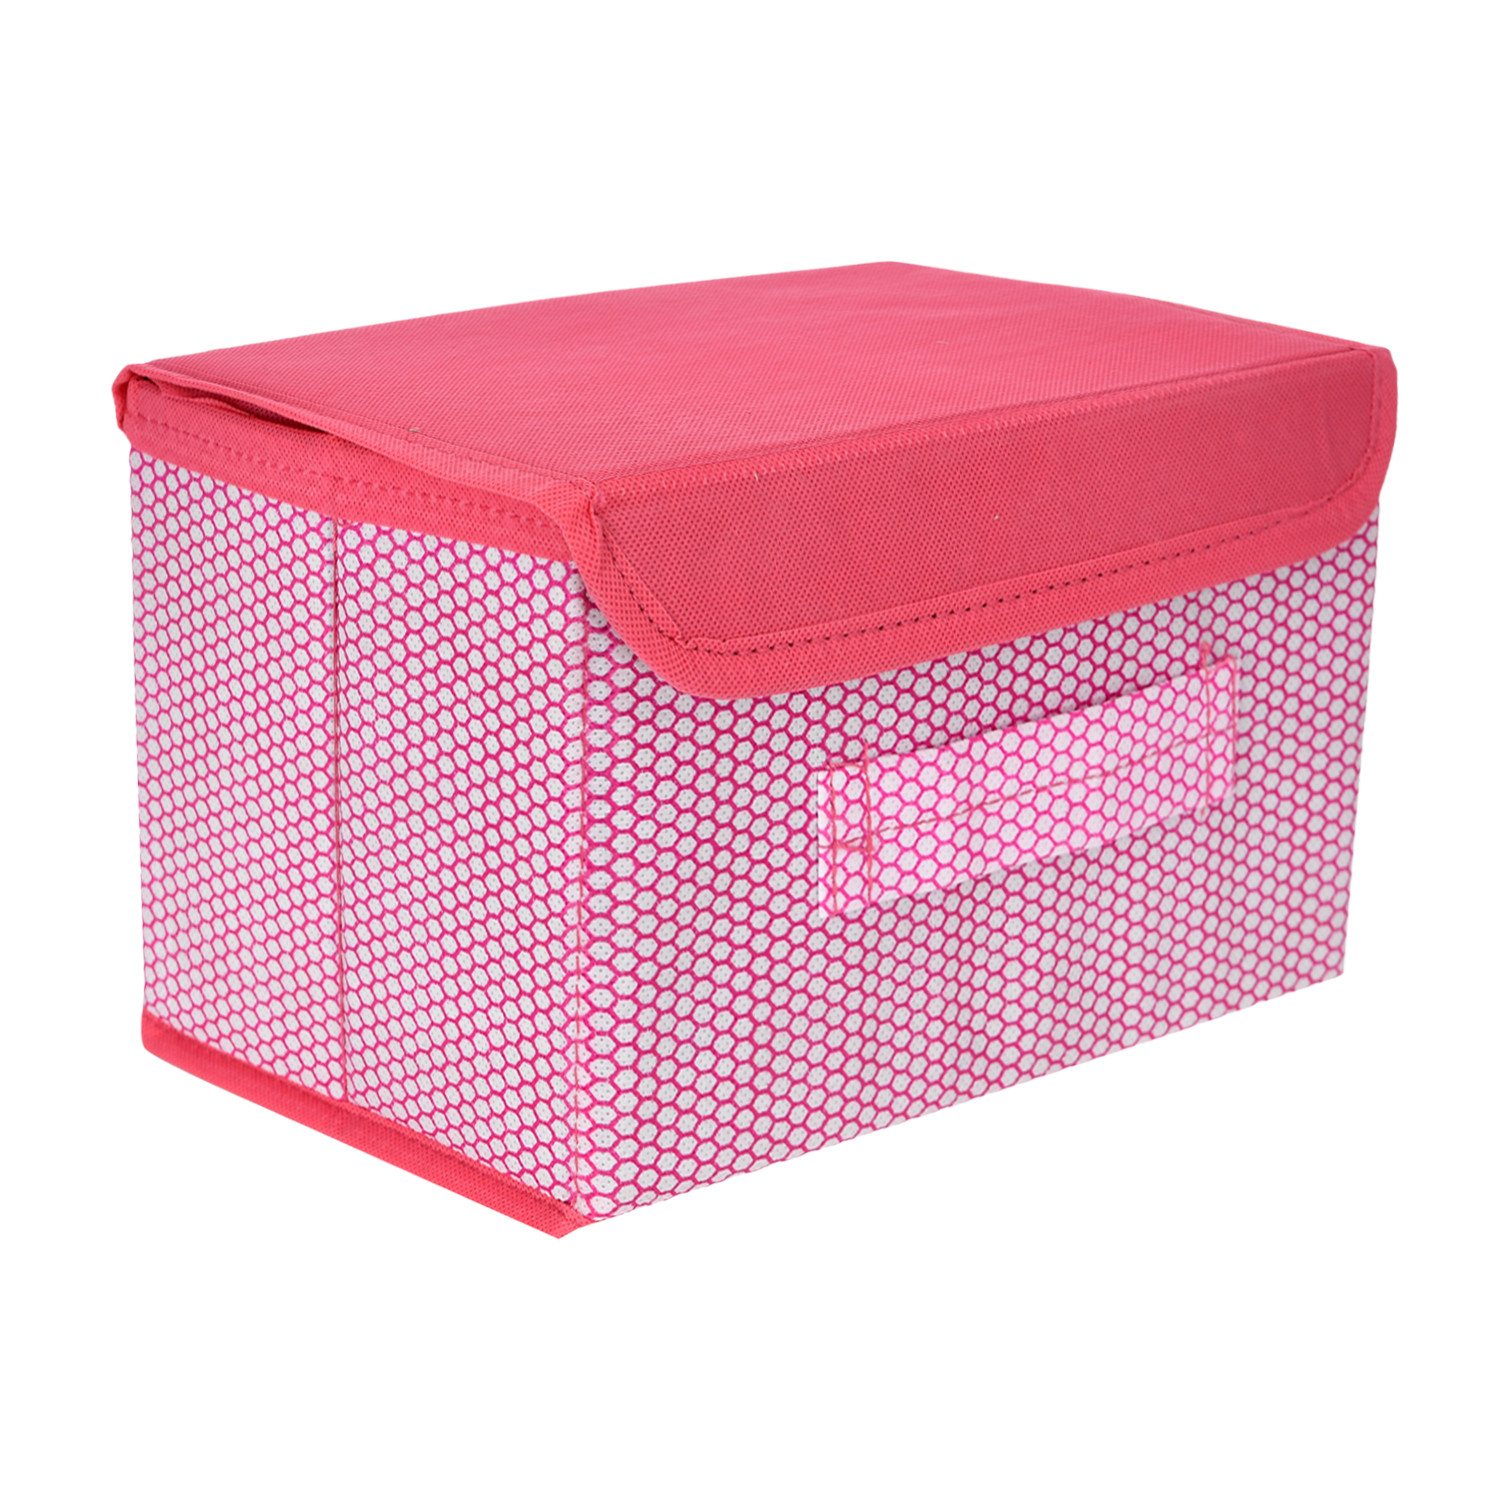 Kuber Industries Drawer Storage Box | Foldable Dhakkan Storage Box | Non-Woven Clothes Organizer For Toys | Storage Box with Handle | Small | Pack of 2 | Pink & Gray